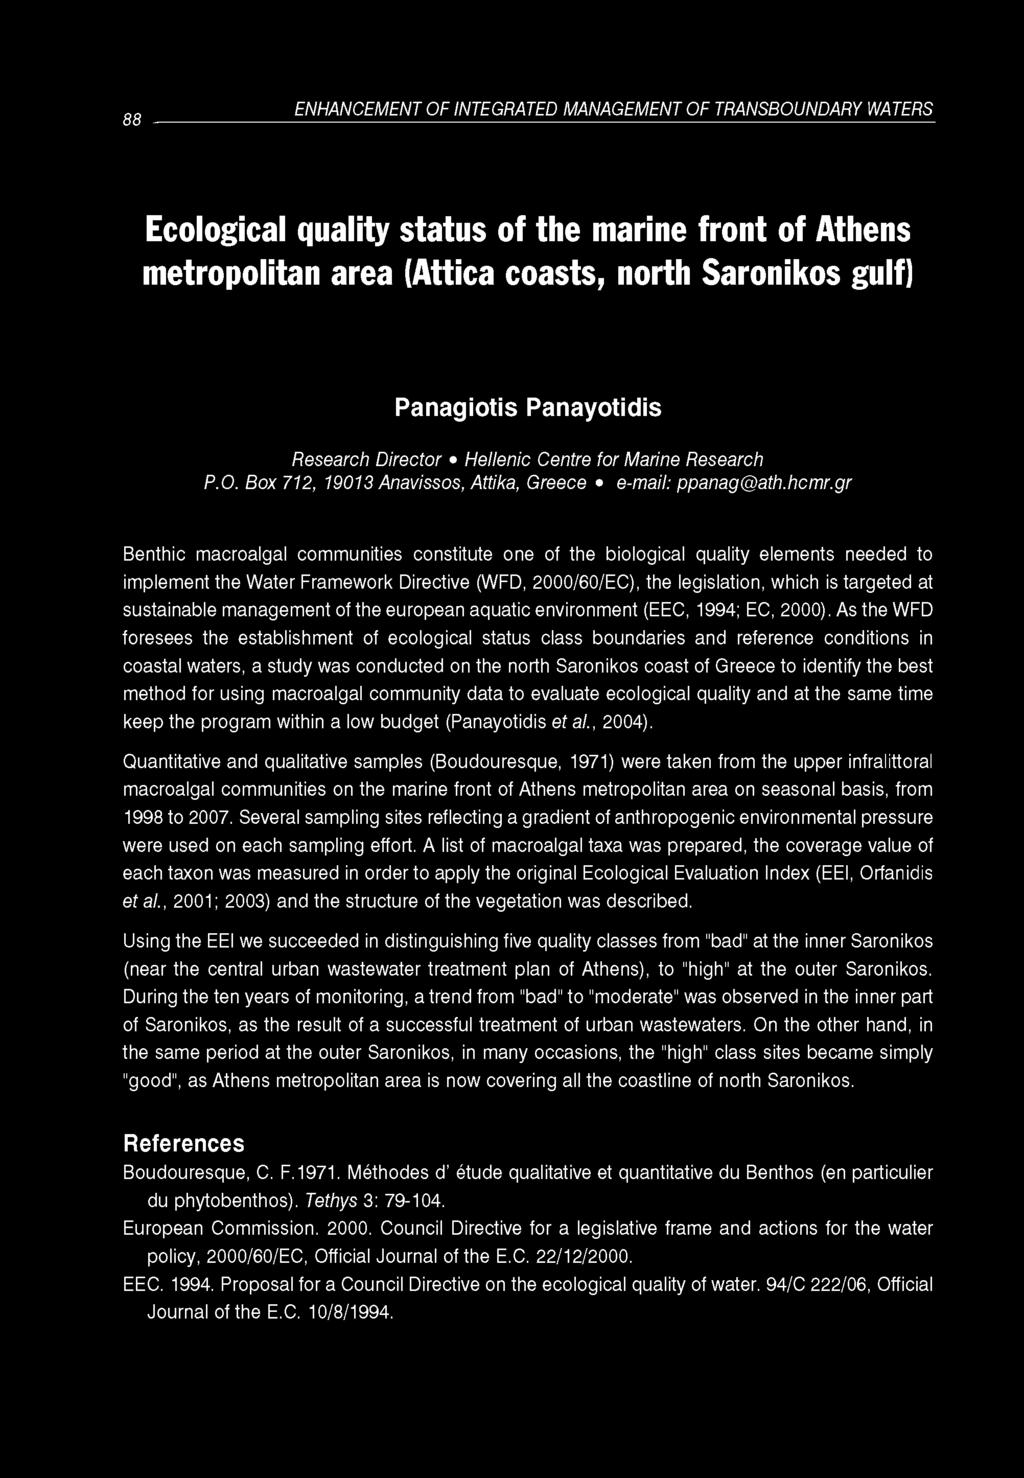 88 ENHANCEMENT OF INTEGRATED MANAGEMENT OF TRANSBOUNDARY WATERS Ecological quality status of the marine front of Athens metropolitan area (Attica coasts, north Saronikos gulf) Panagiotis Panayotidis